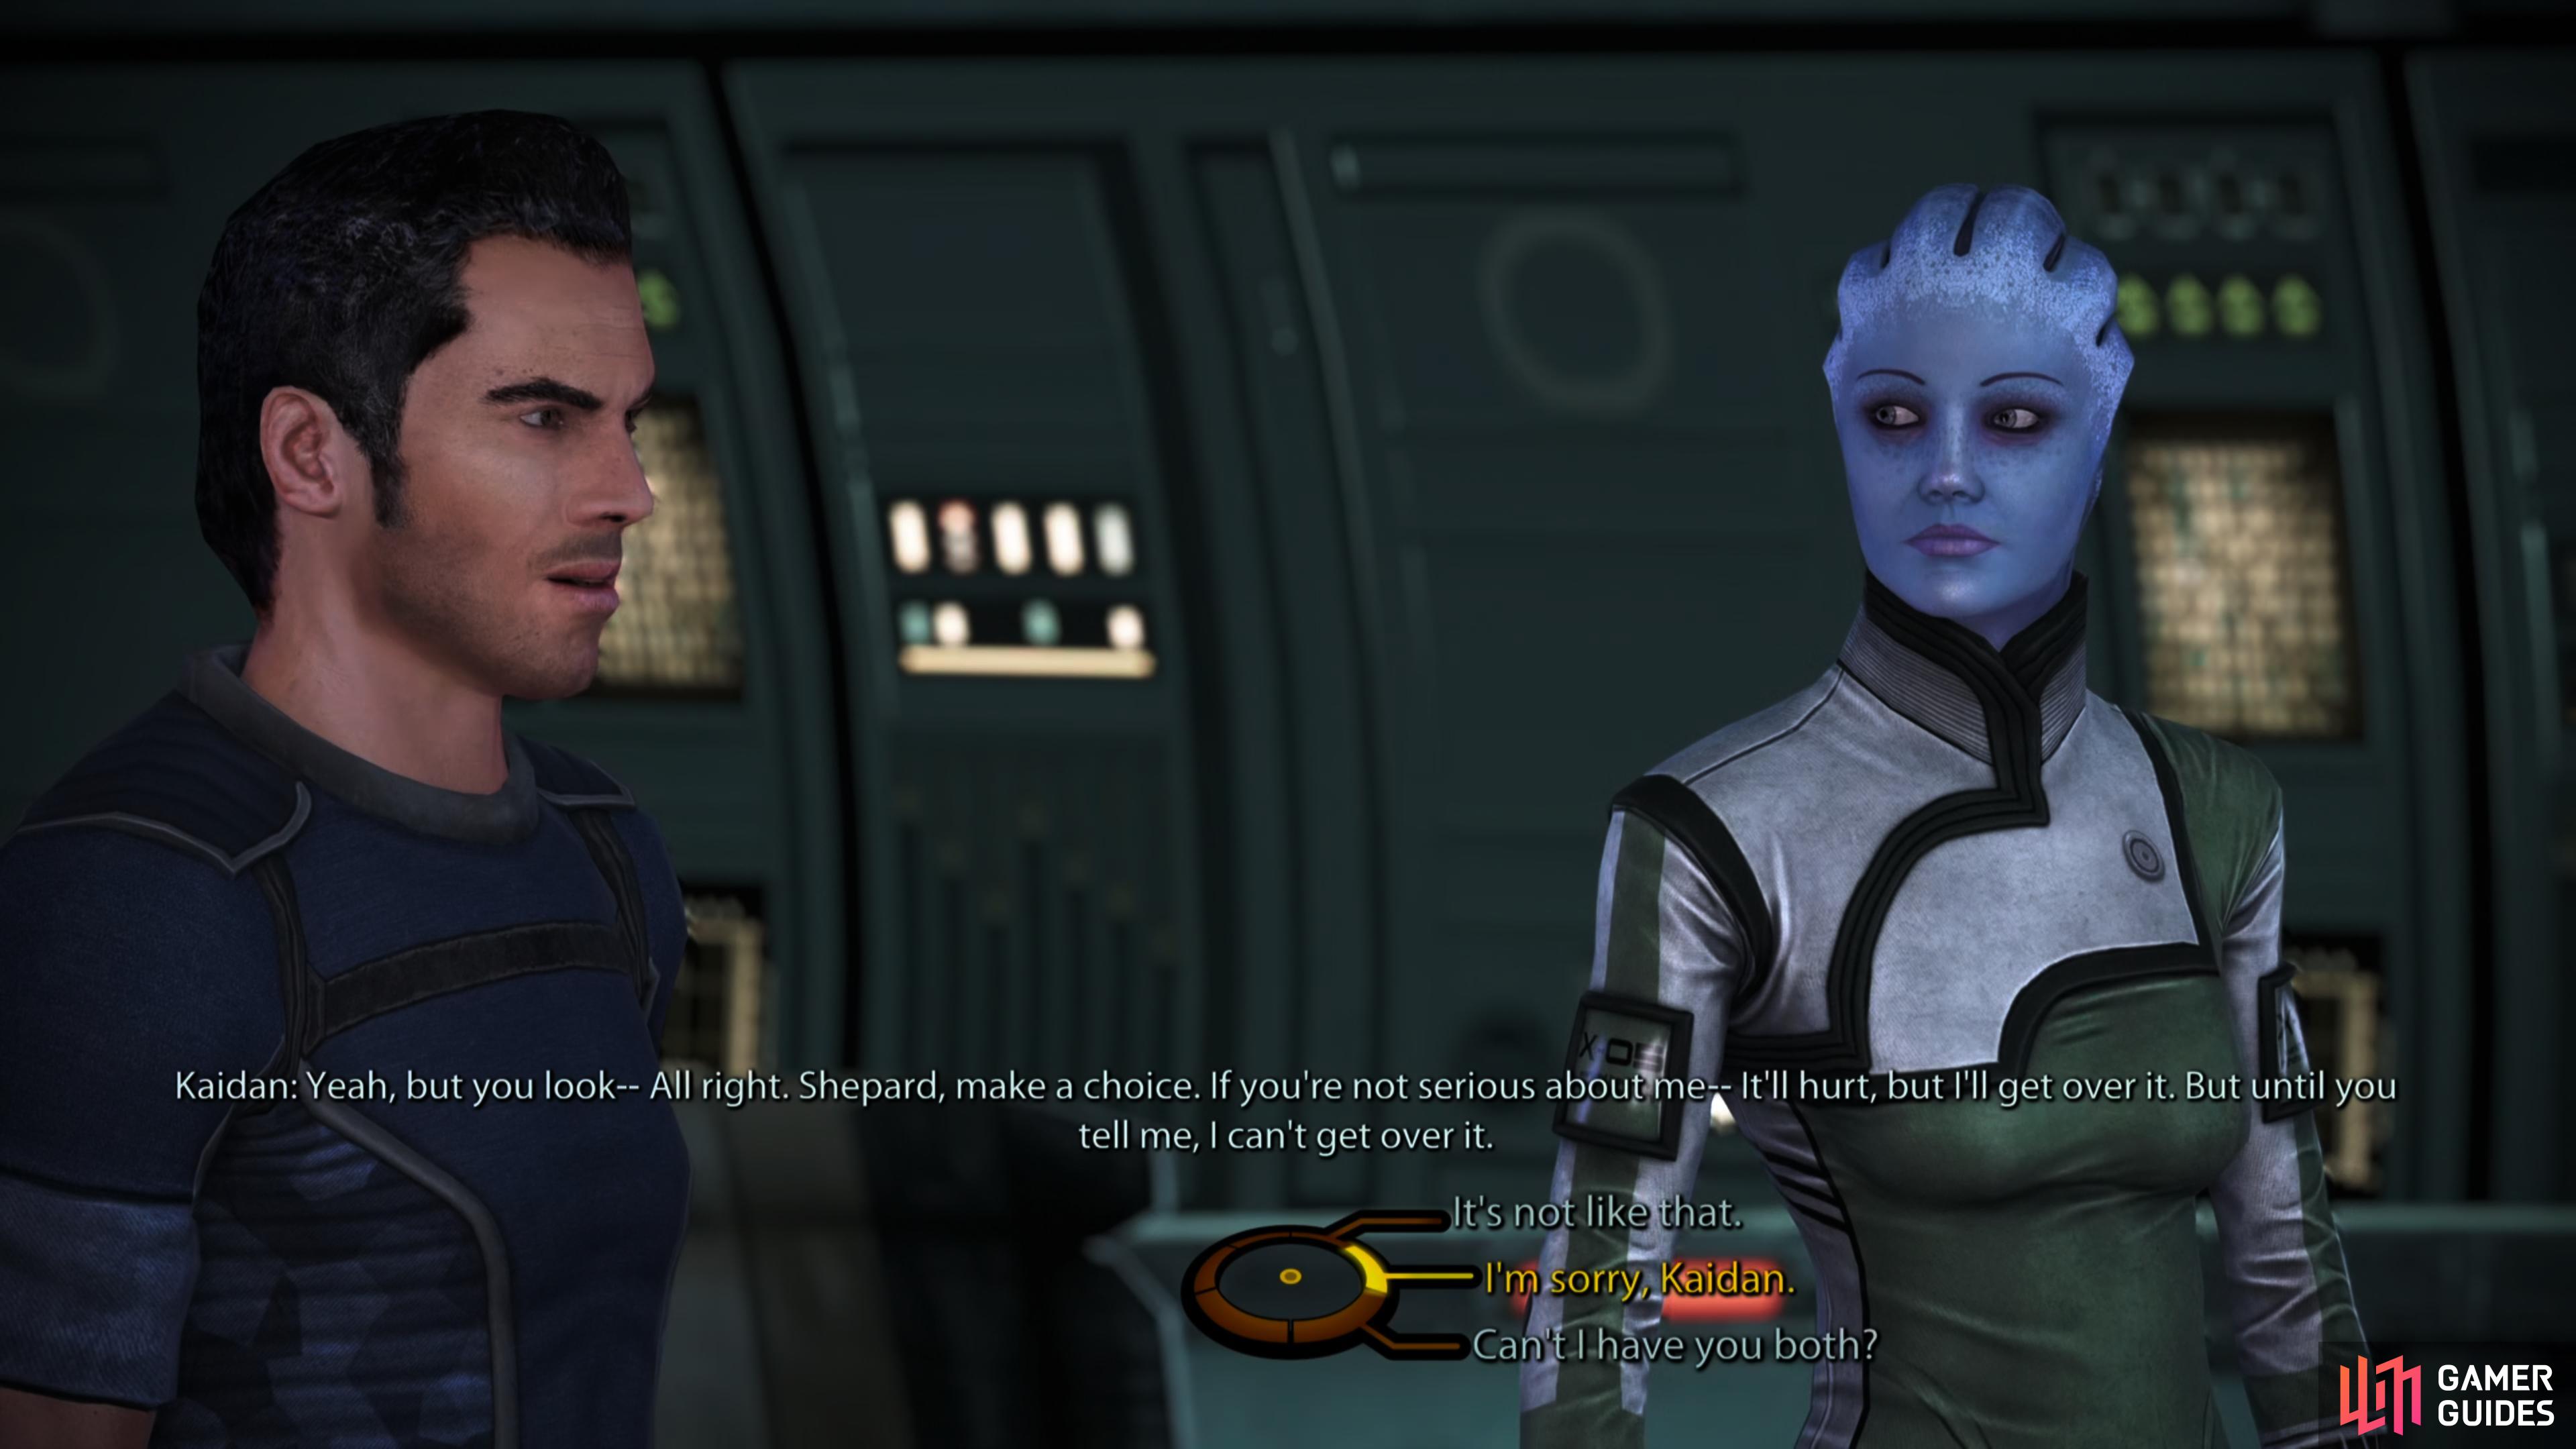 If you’ve been flirting with more than one companion, you’ll have to cut one loose after three core missions.